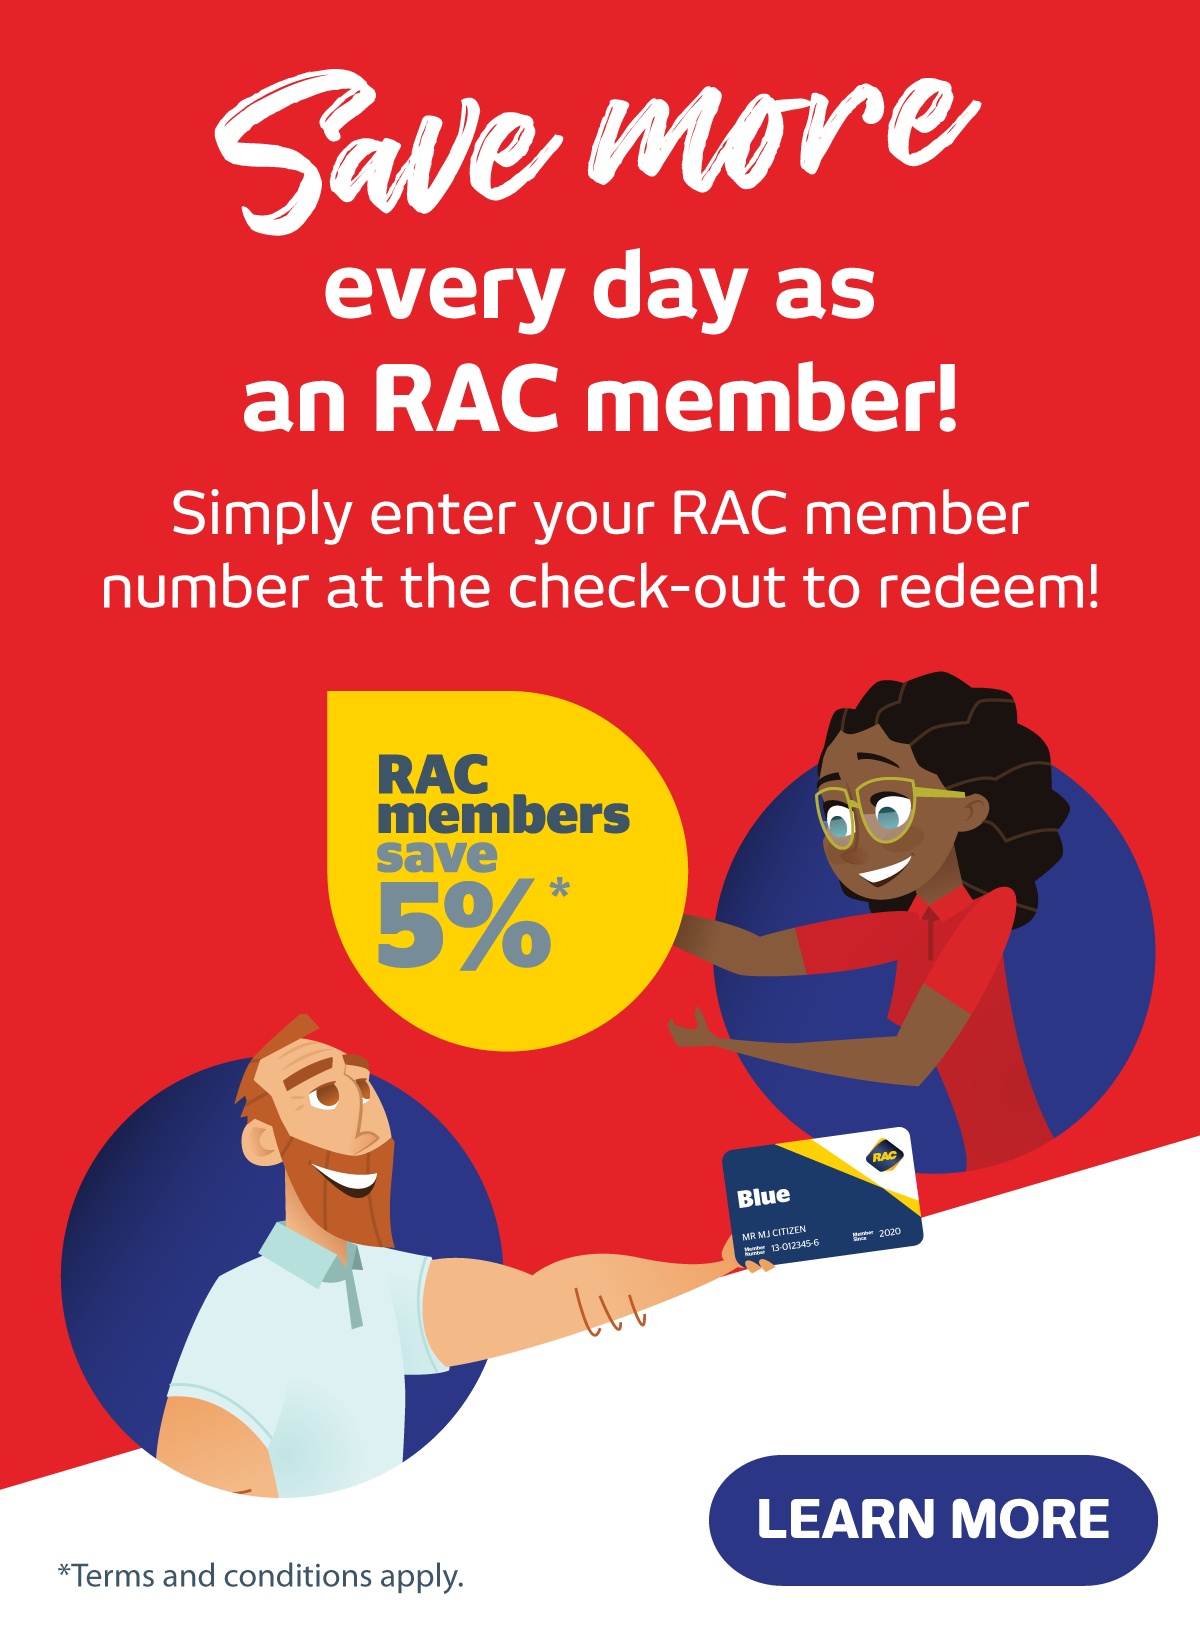 RAC Member? Save an extra 5%* every day - Retravision